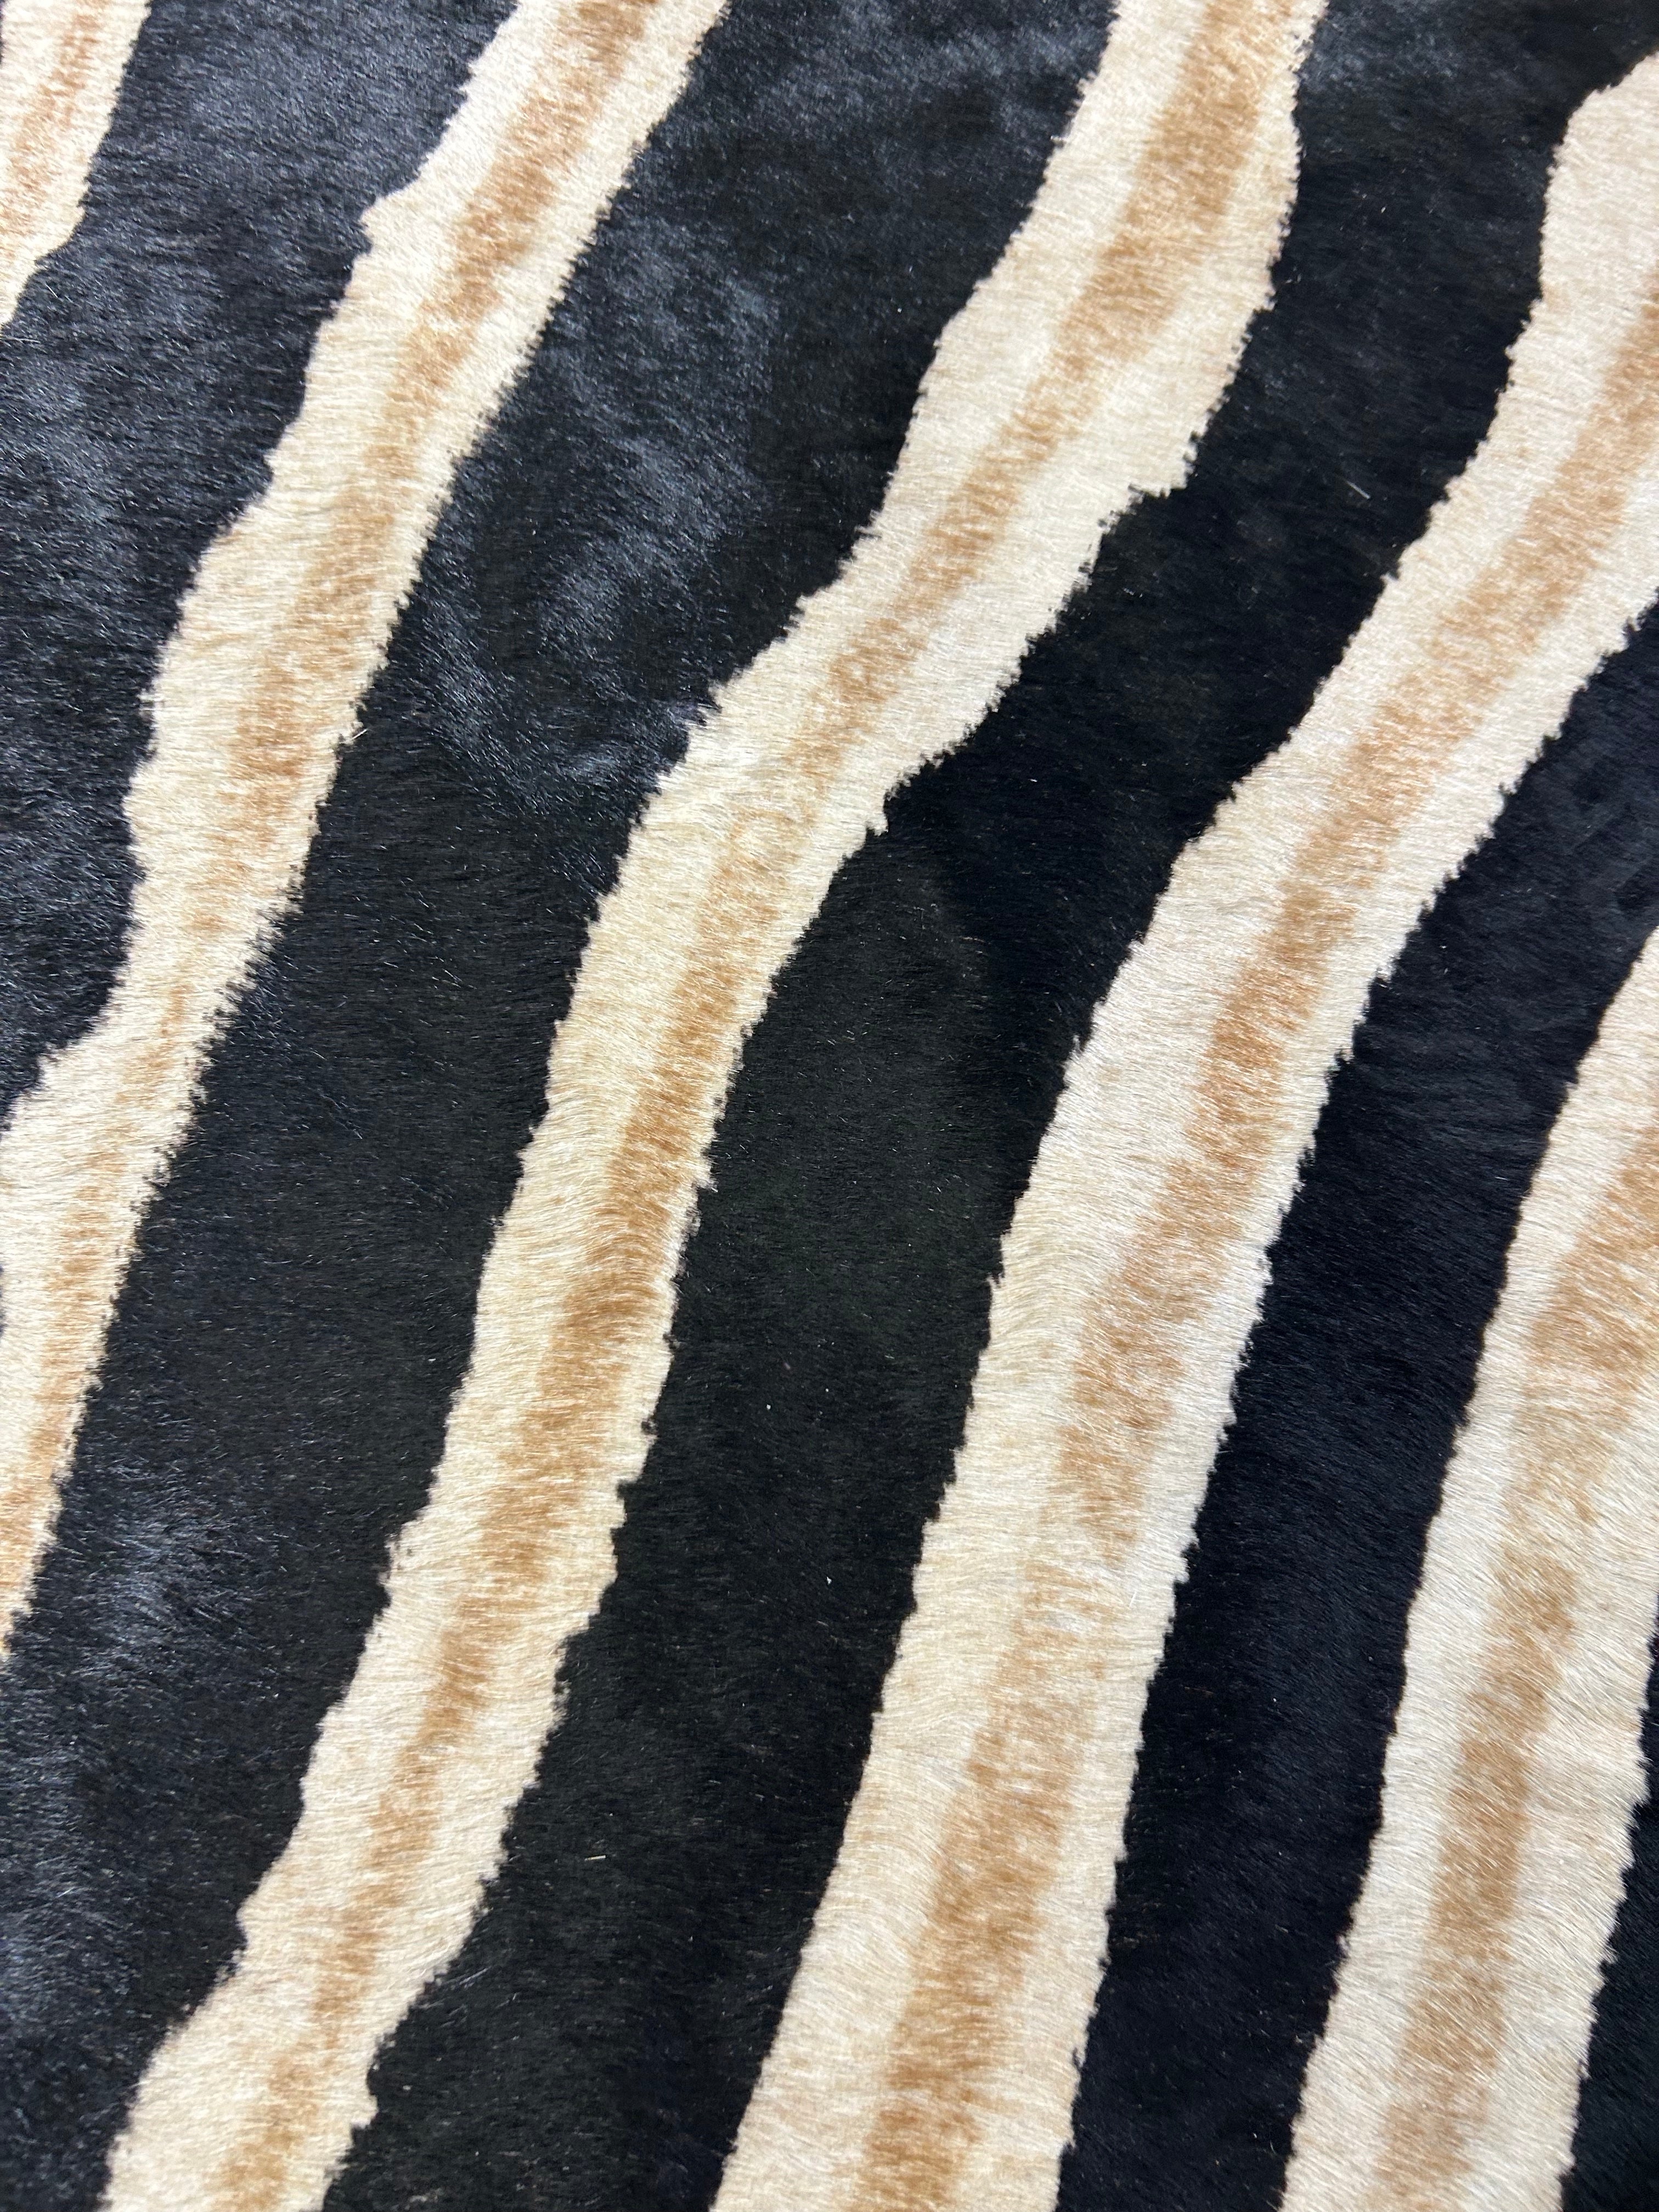 Dark Genuine Zebra Print Cowhide Rug (has a couple of patches) Size: 7.5x6 feet D-072